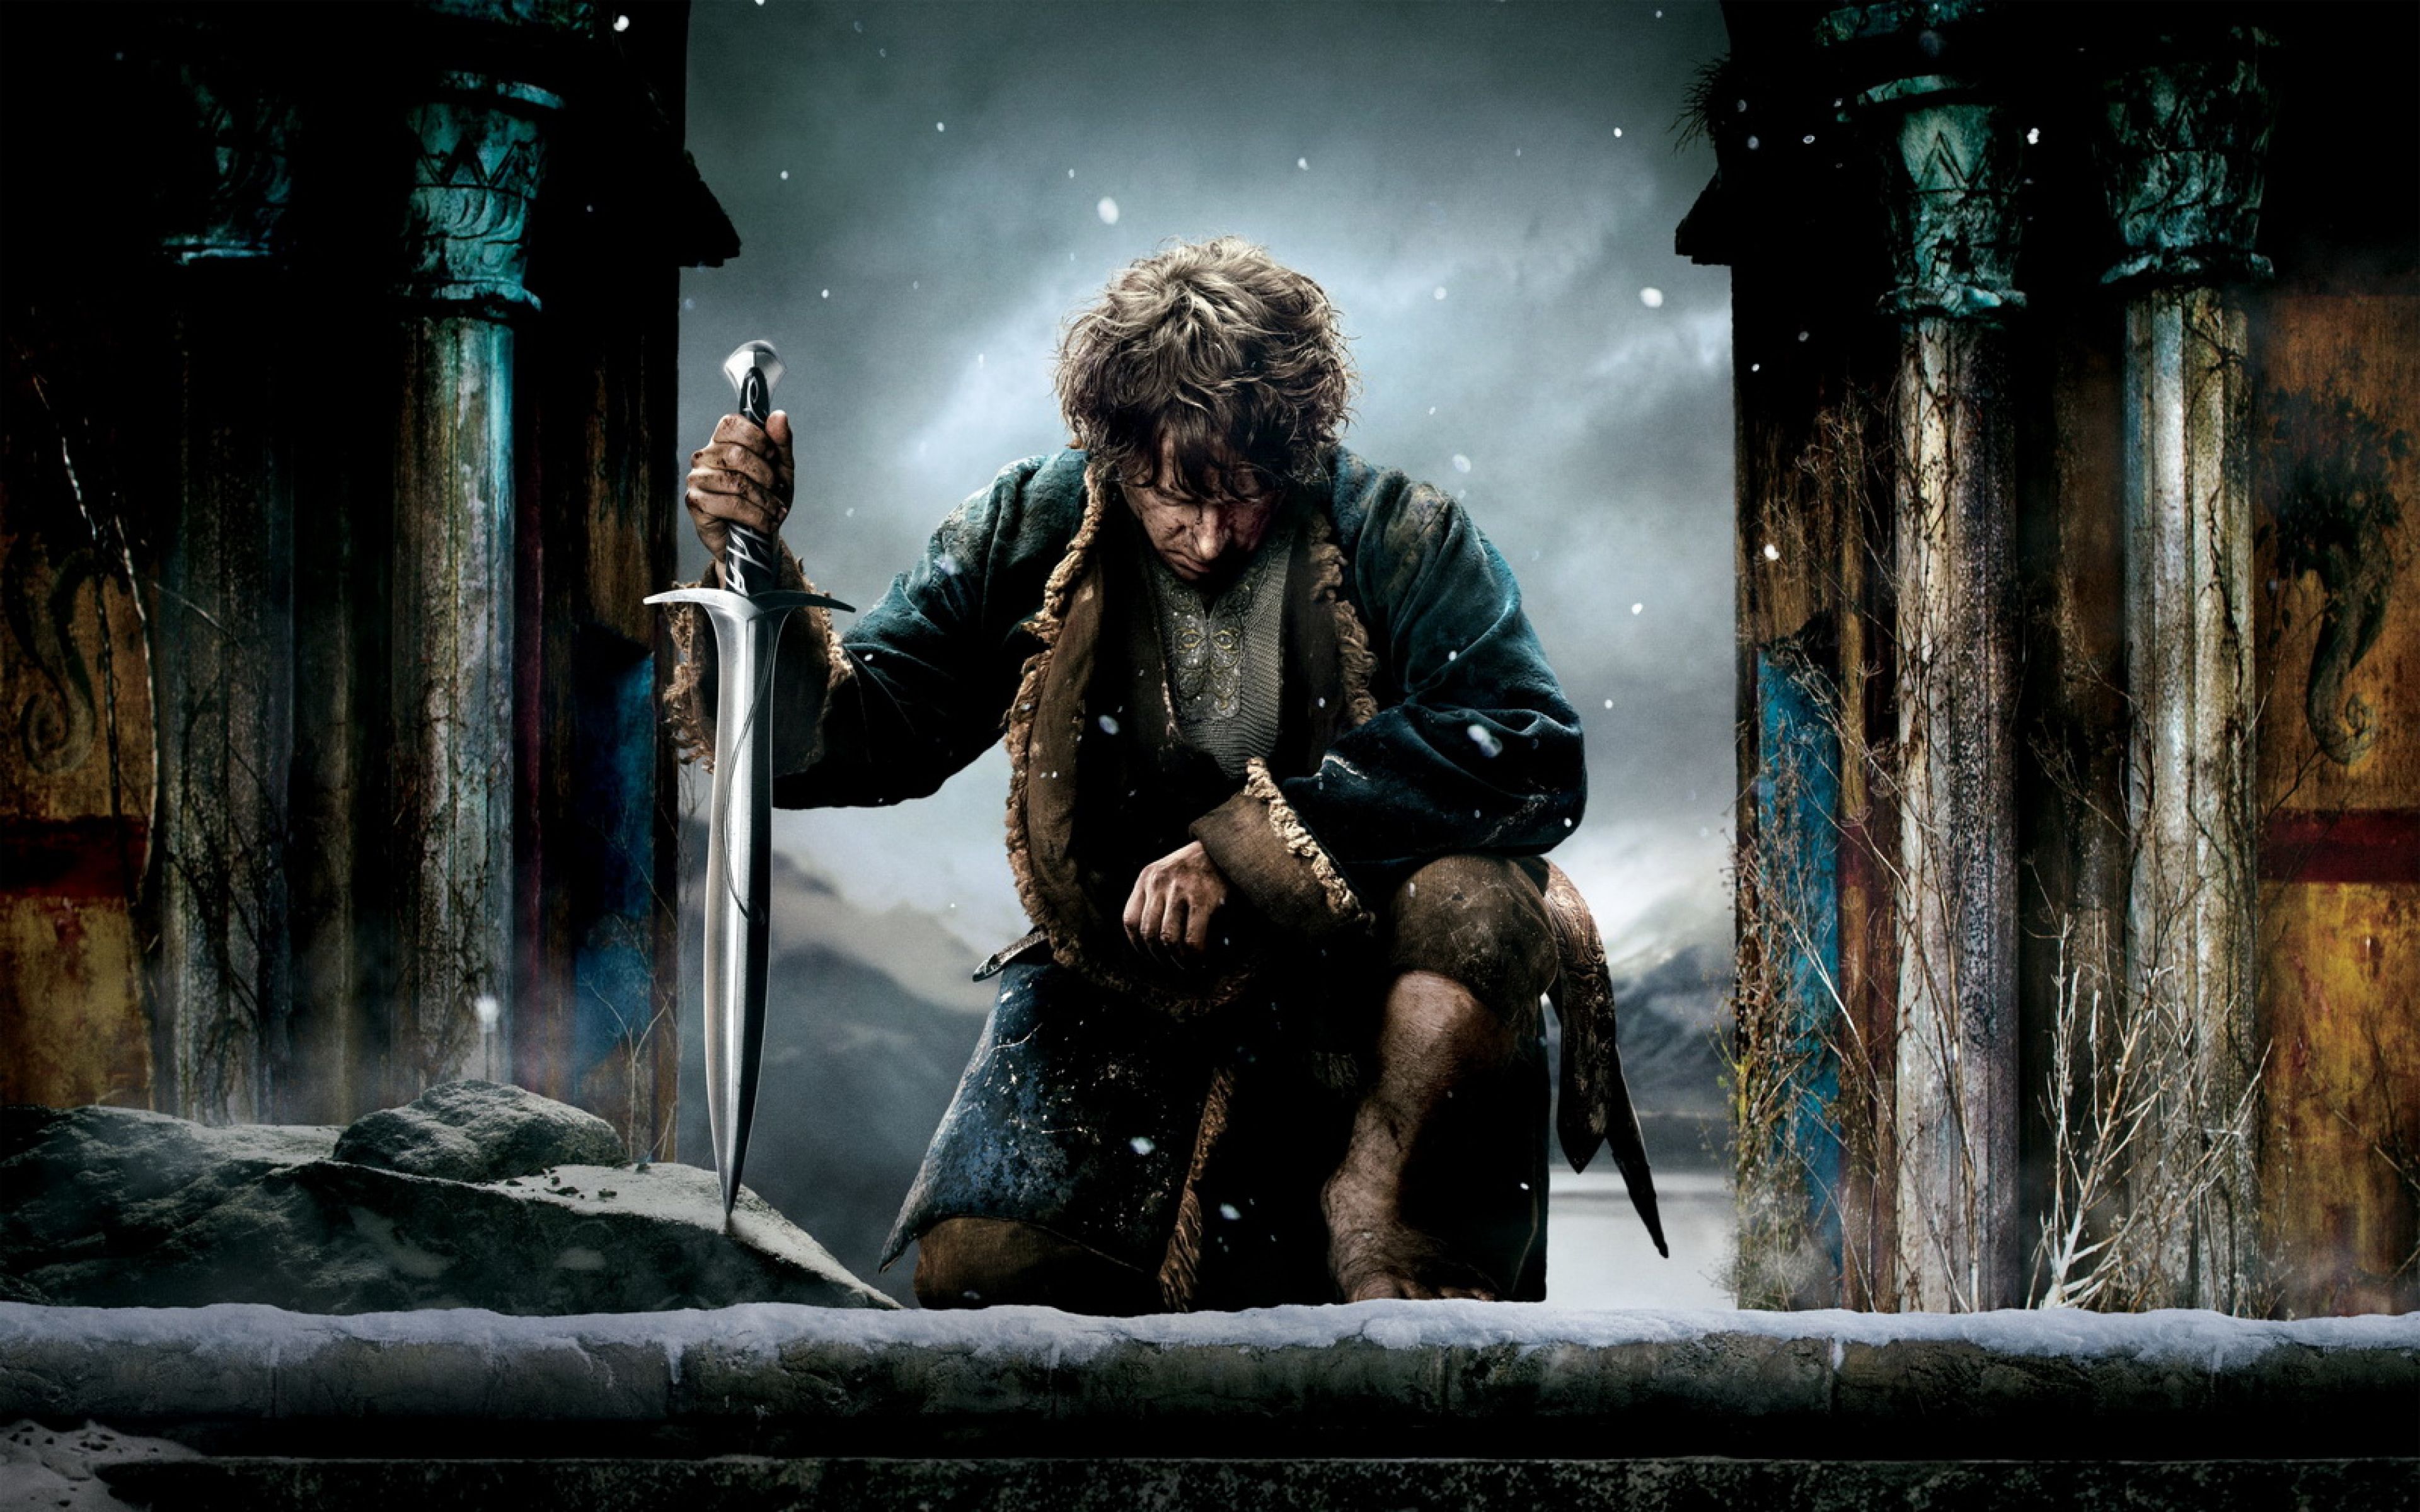 Download Wallpaper 3840x2400 The hobbit the battle of the five